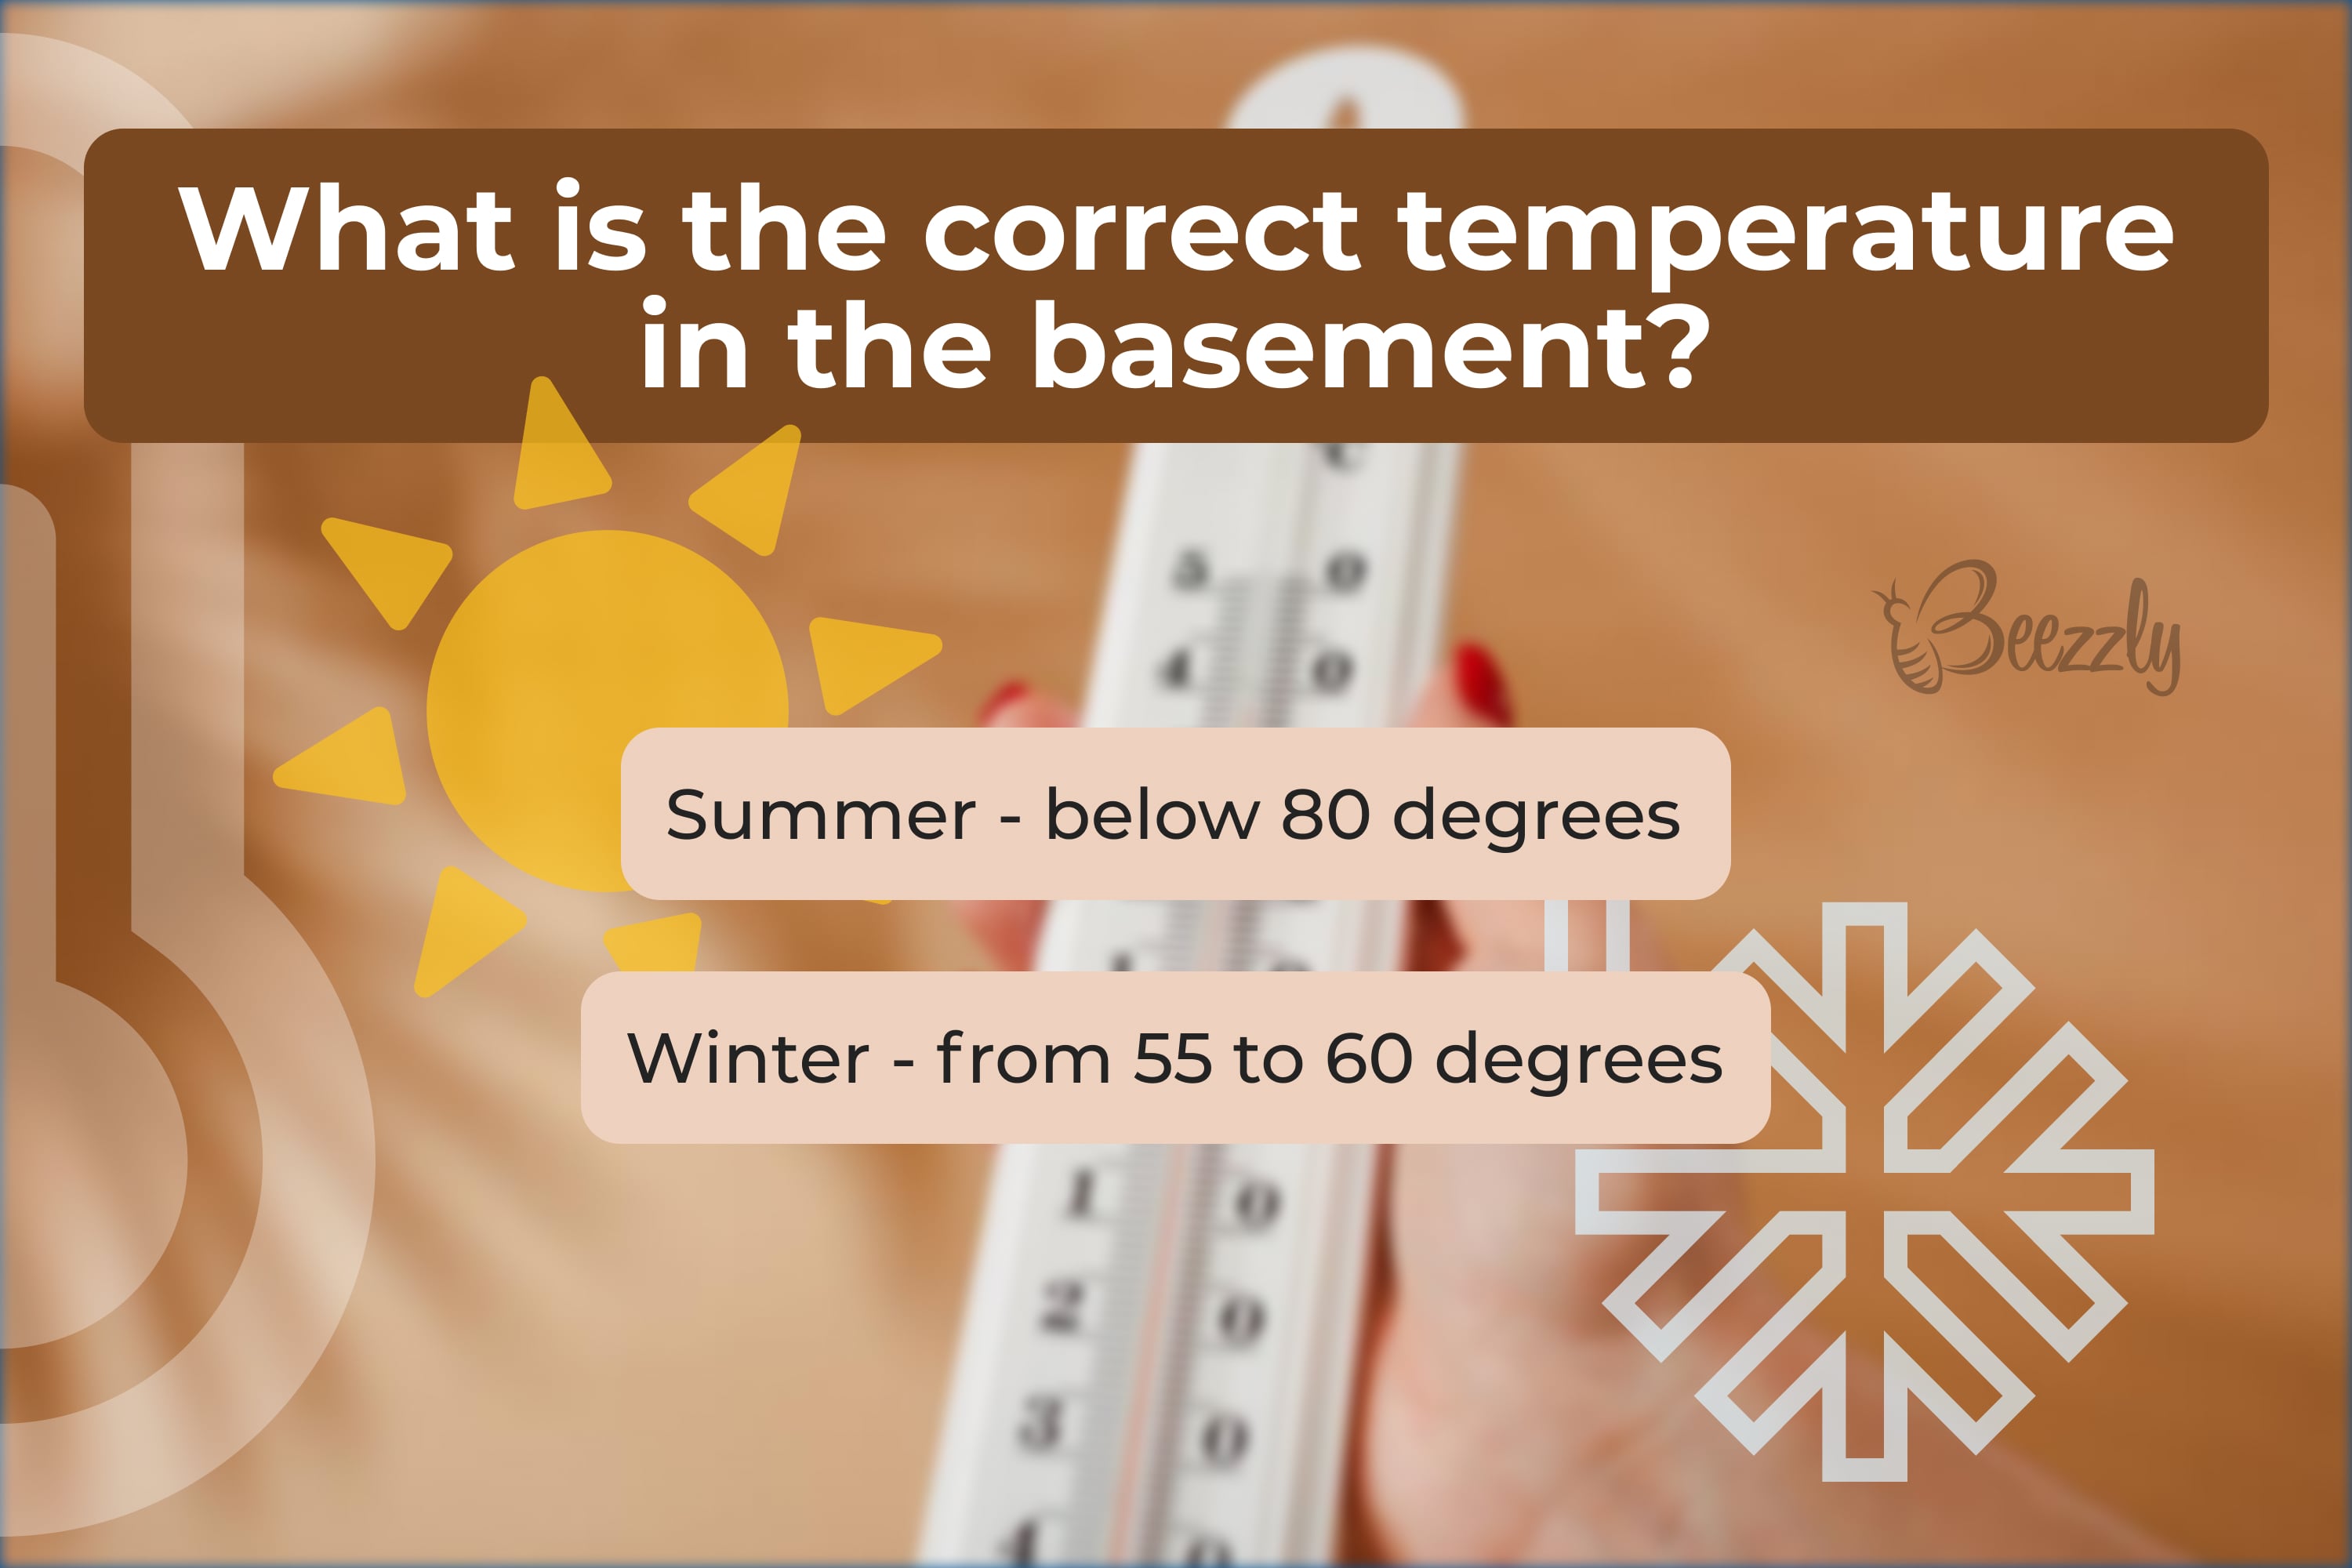 What is the correct temperature in the basement